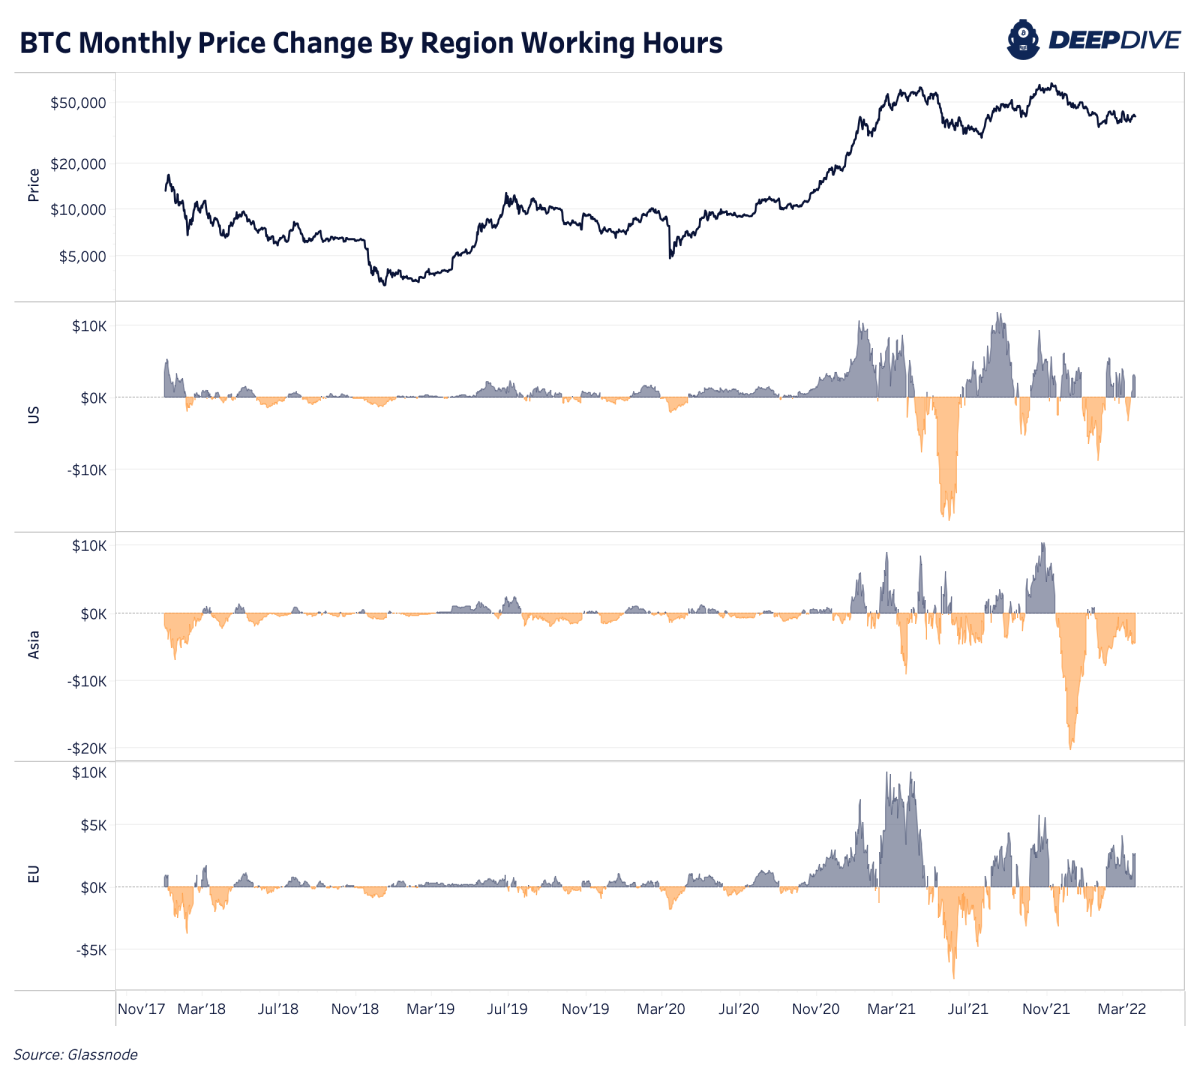 The latest bitcoin upwards price momentum seems to be coming from western buyers, but persistent Asian-hours selling pressure is tempering bullishness.